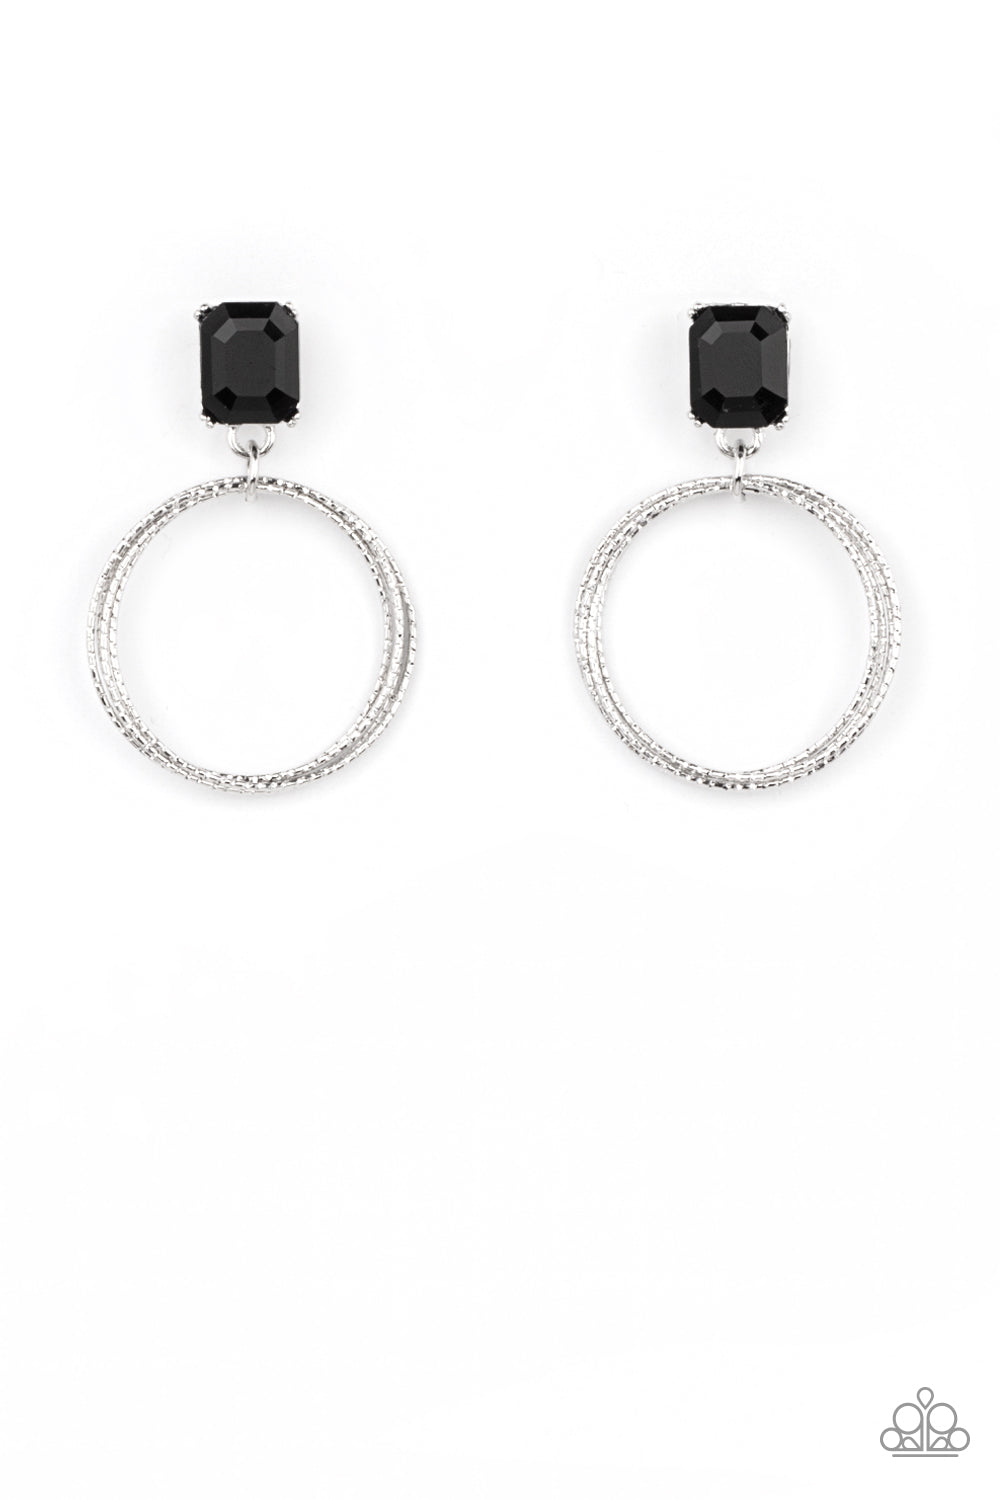 five-dollar-jewelry-prismatic-perfection-black-post earrings-paparazzi-accessories